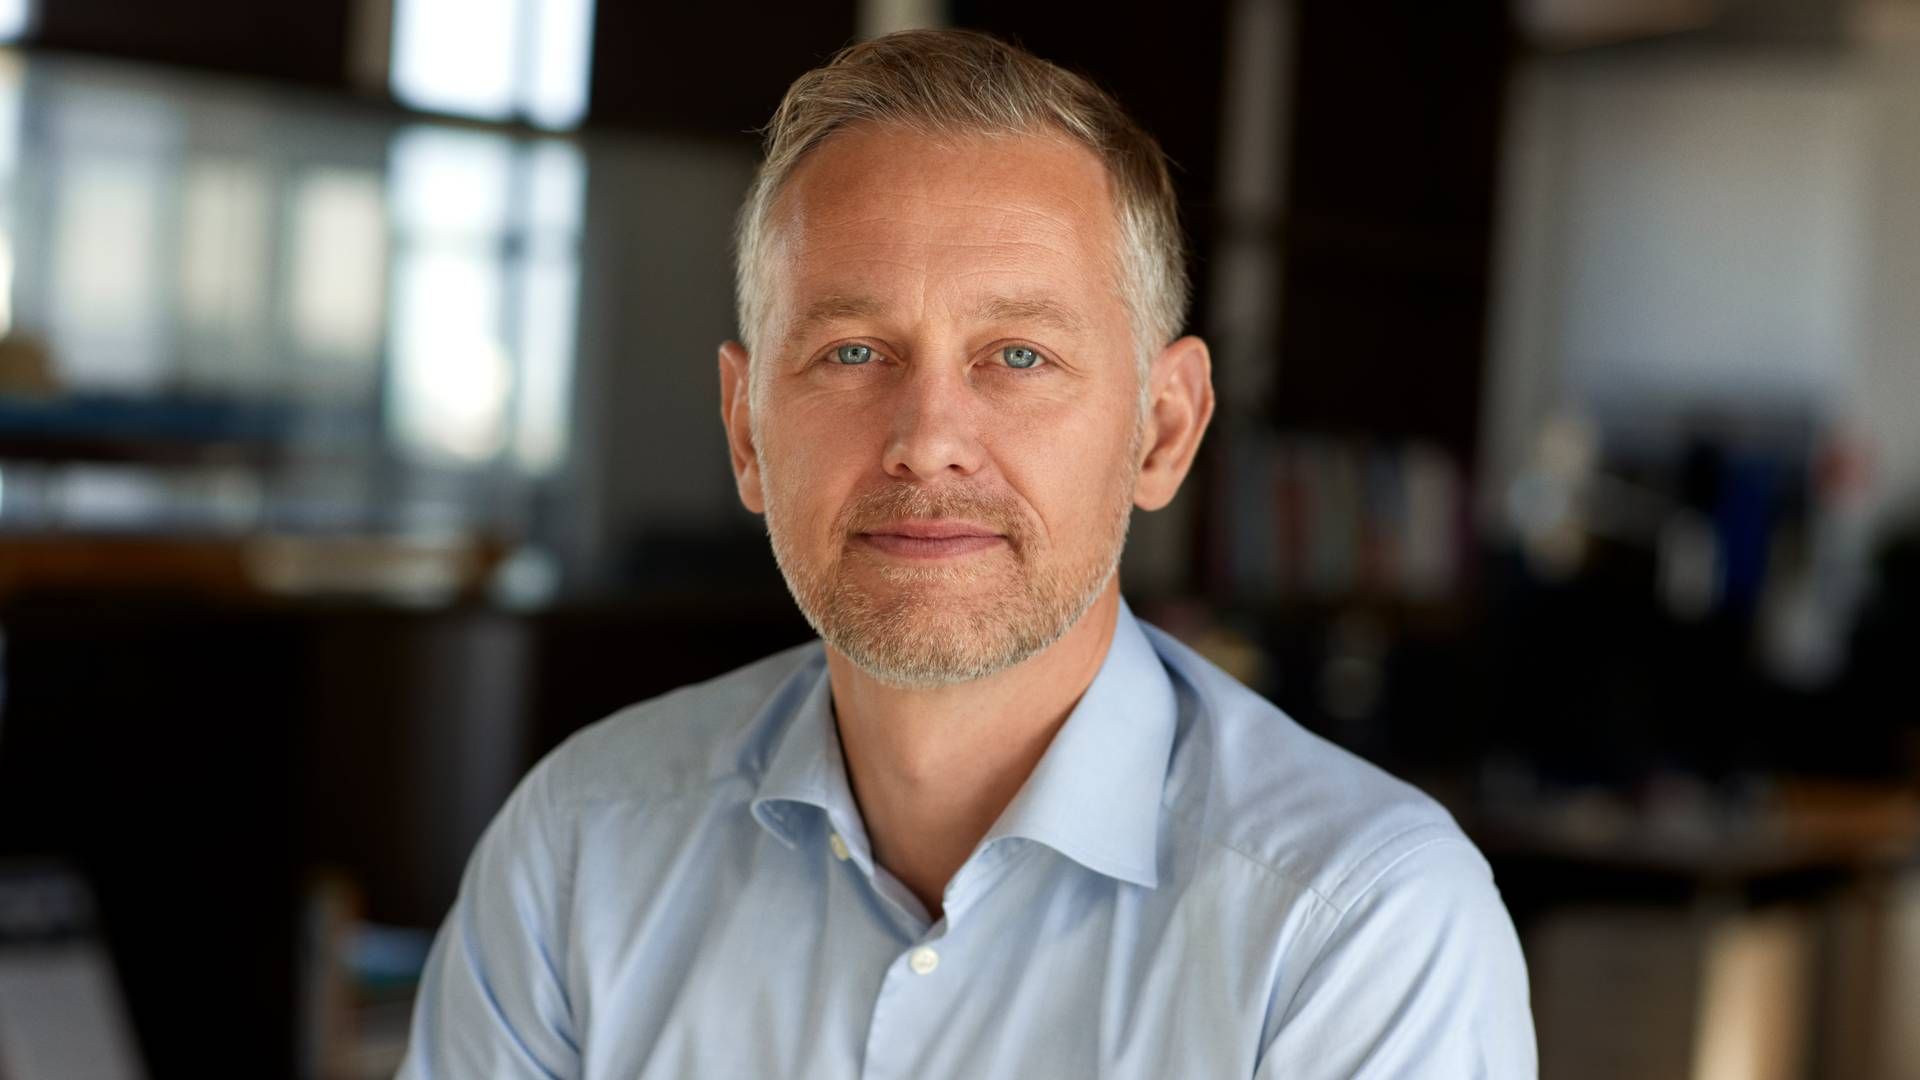 "To improve our competitiveness, we need a leaner and more agile setup with decision-making closer to the frontline," says Christian M. Ingerselv, CEO of Maersk Supply Service. | Photo: Pr-foto